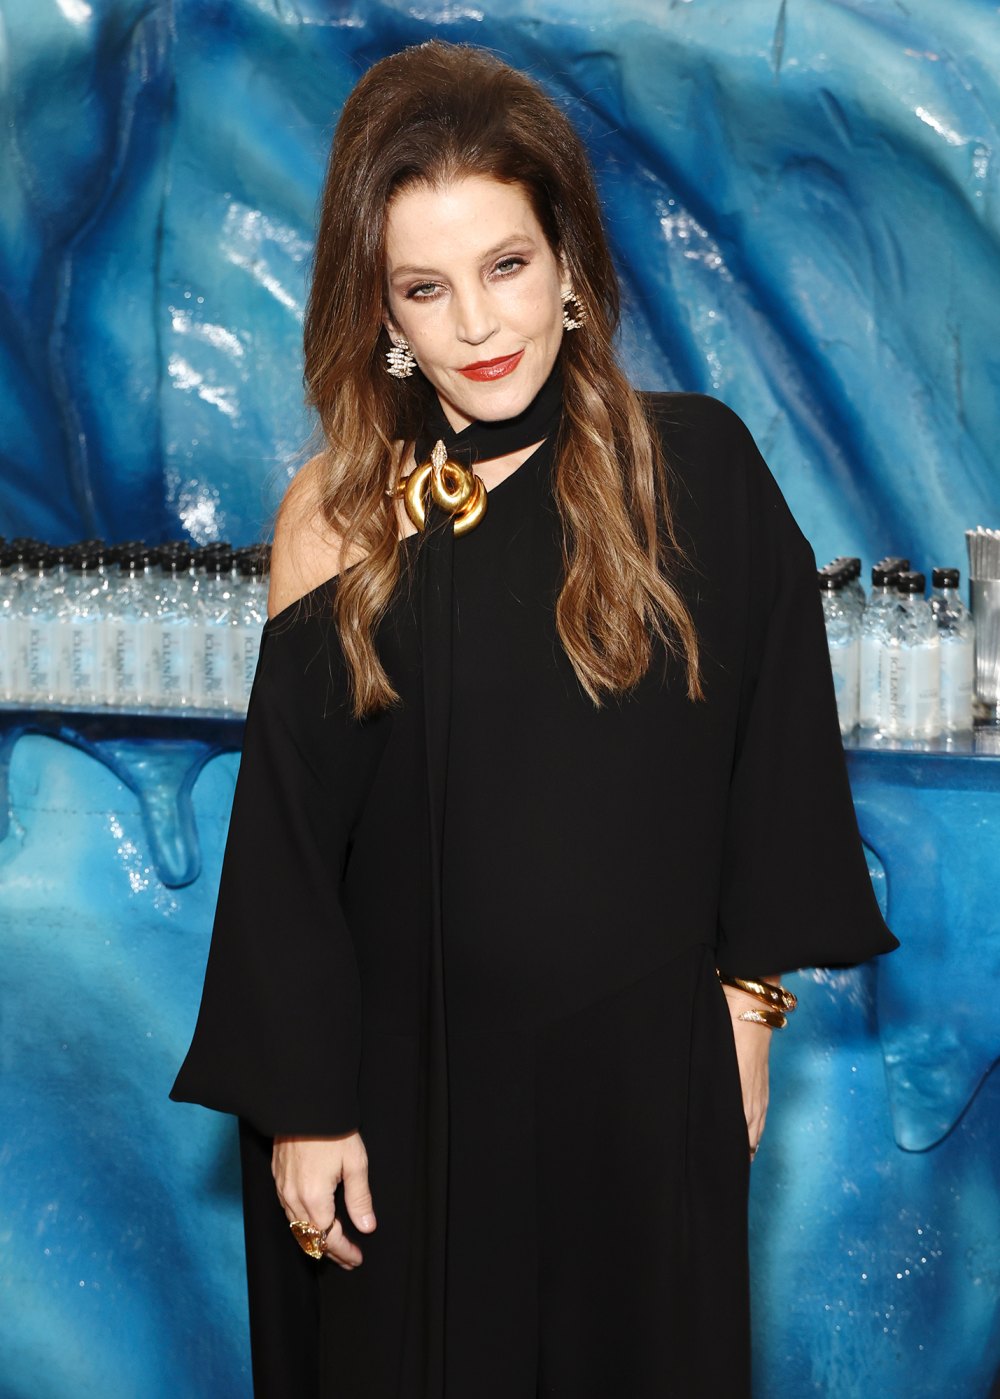 Lisa Marie Presley’s Estate Sued for $3.8 Million Over 2018 Loan She Allegedly Failed to Pay Off